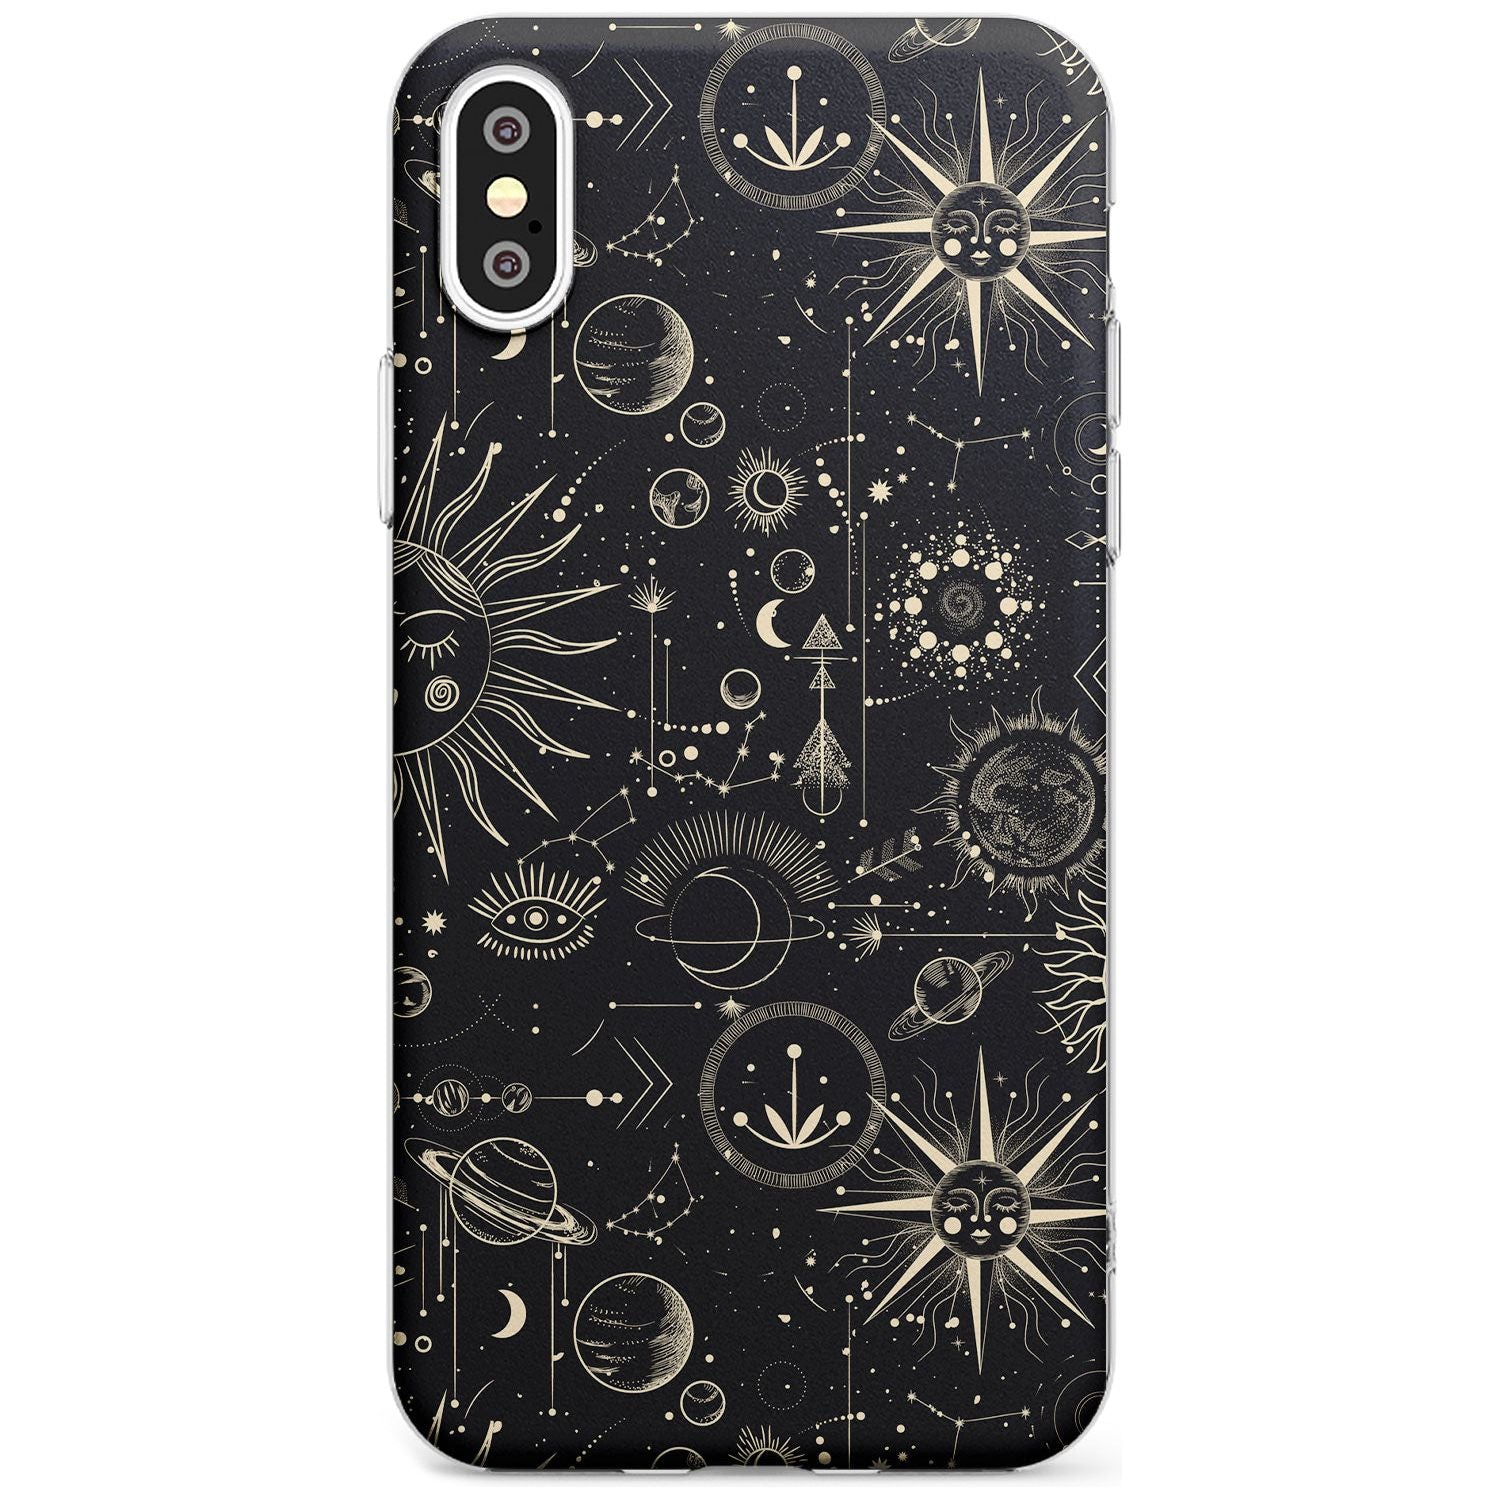 Suns & Planets Black Impact Phone Case for iPhone X XS Max XR